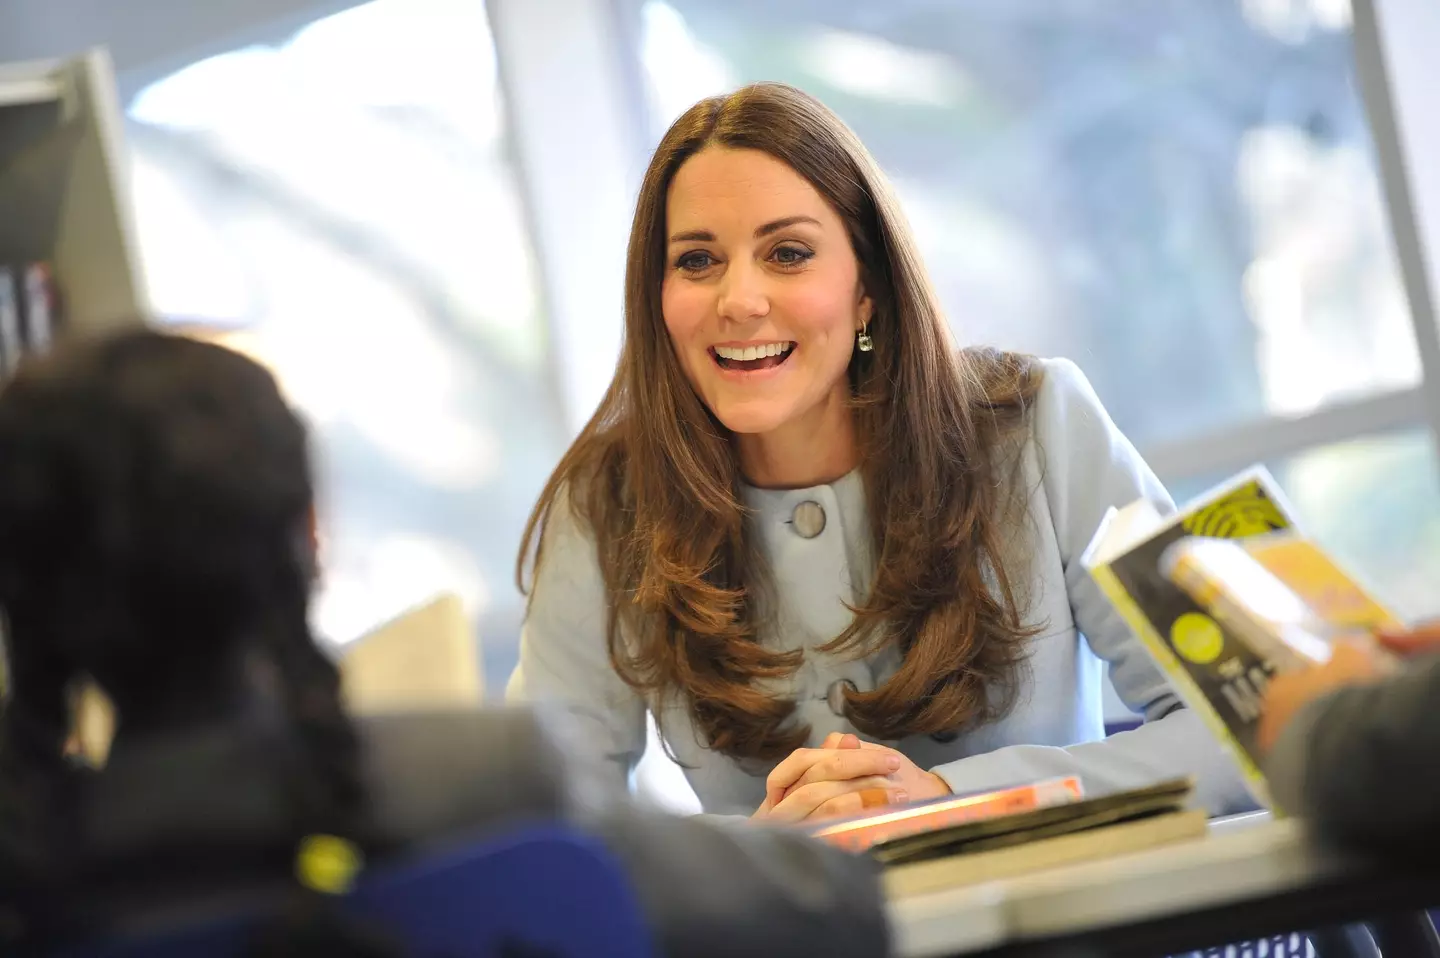 Kate Middleton is the new Princess of Wales.